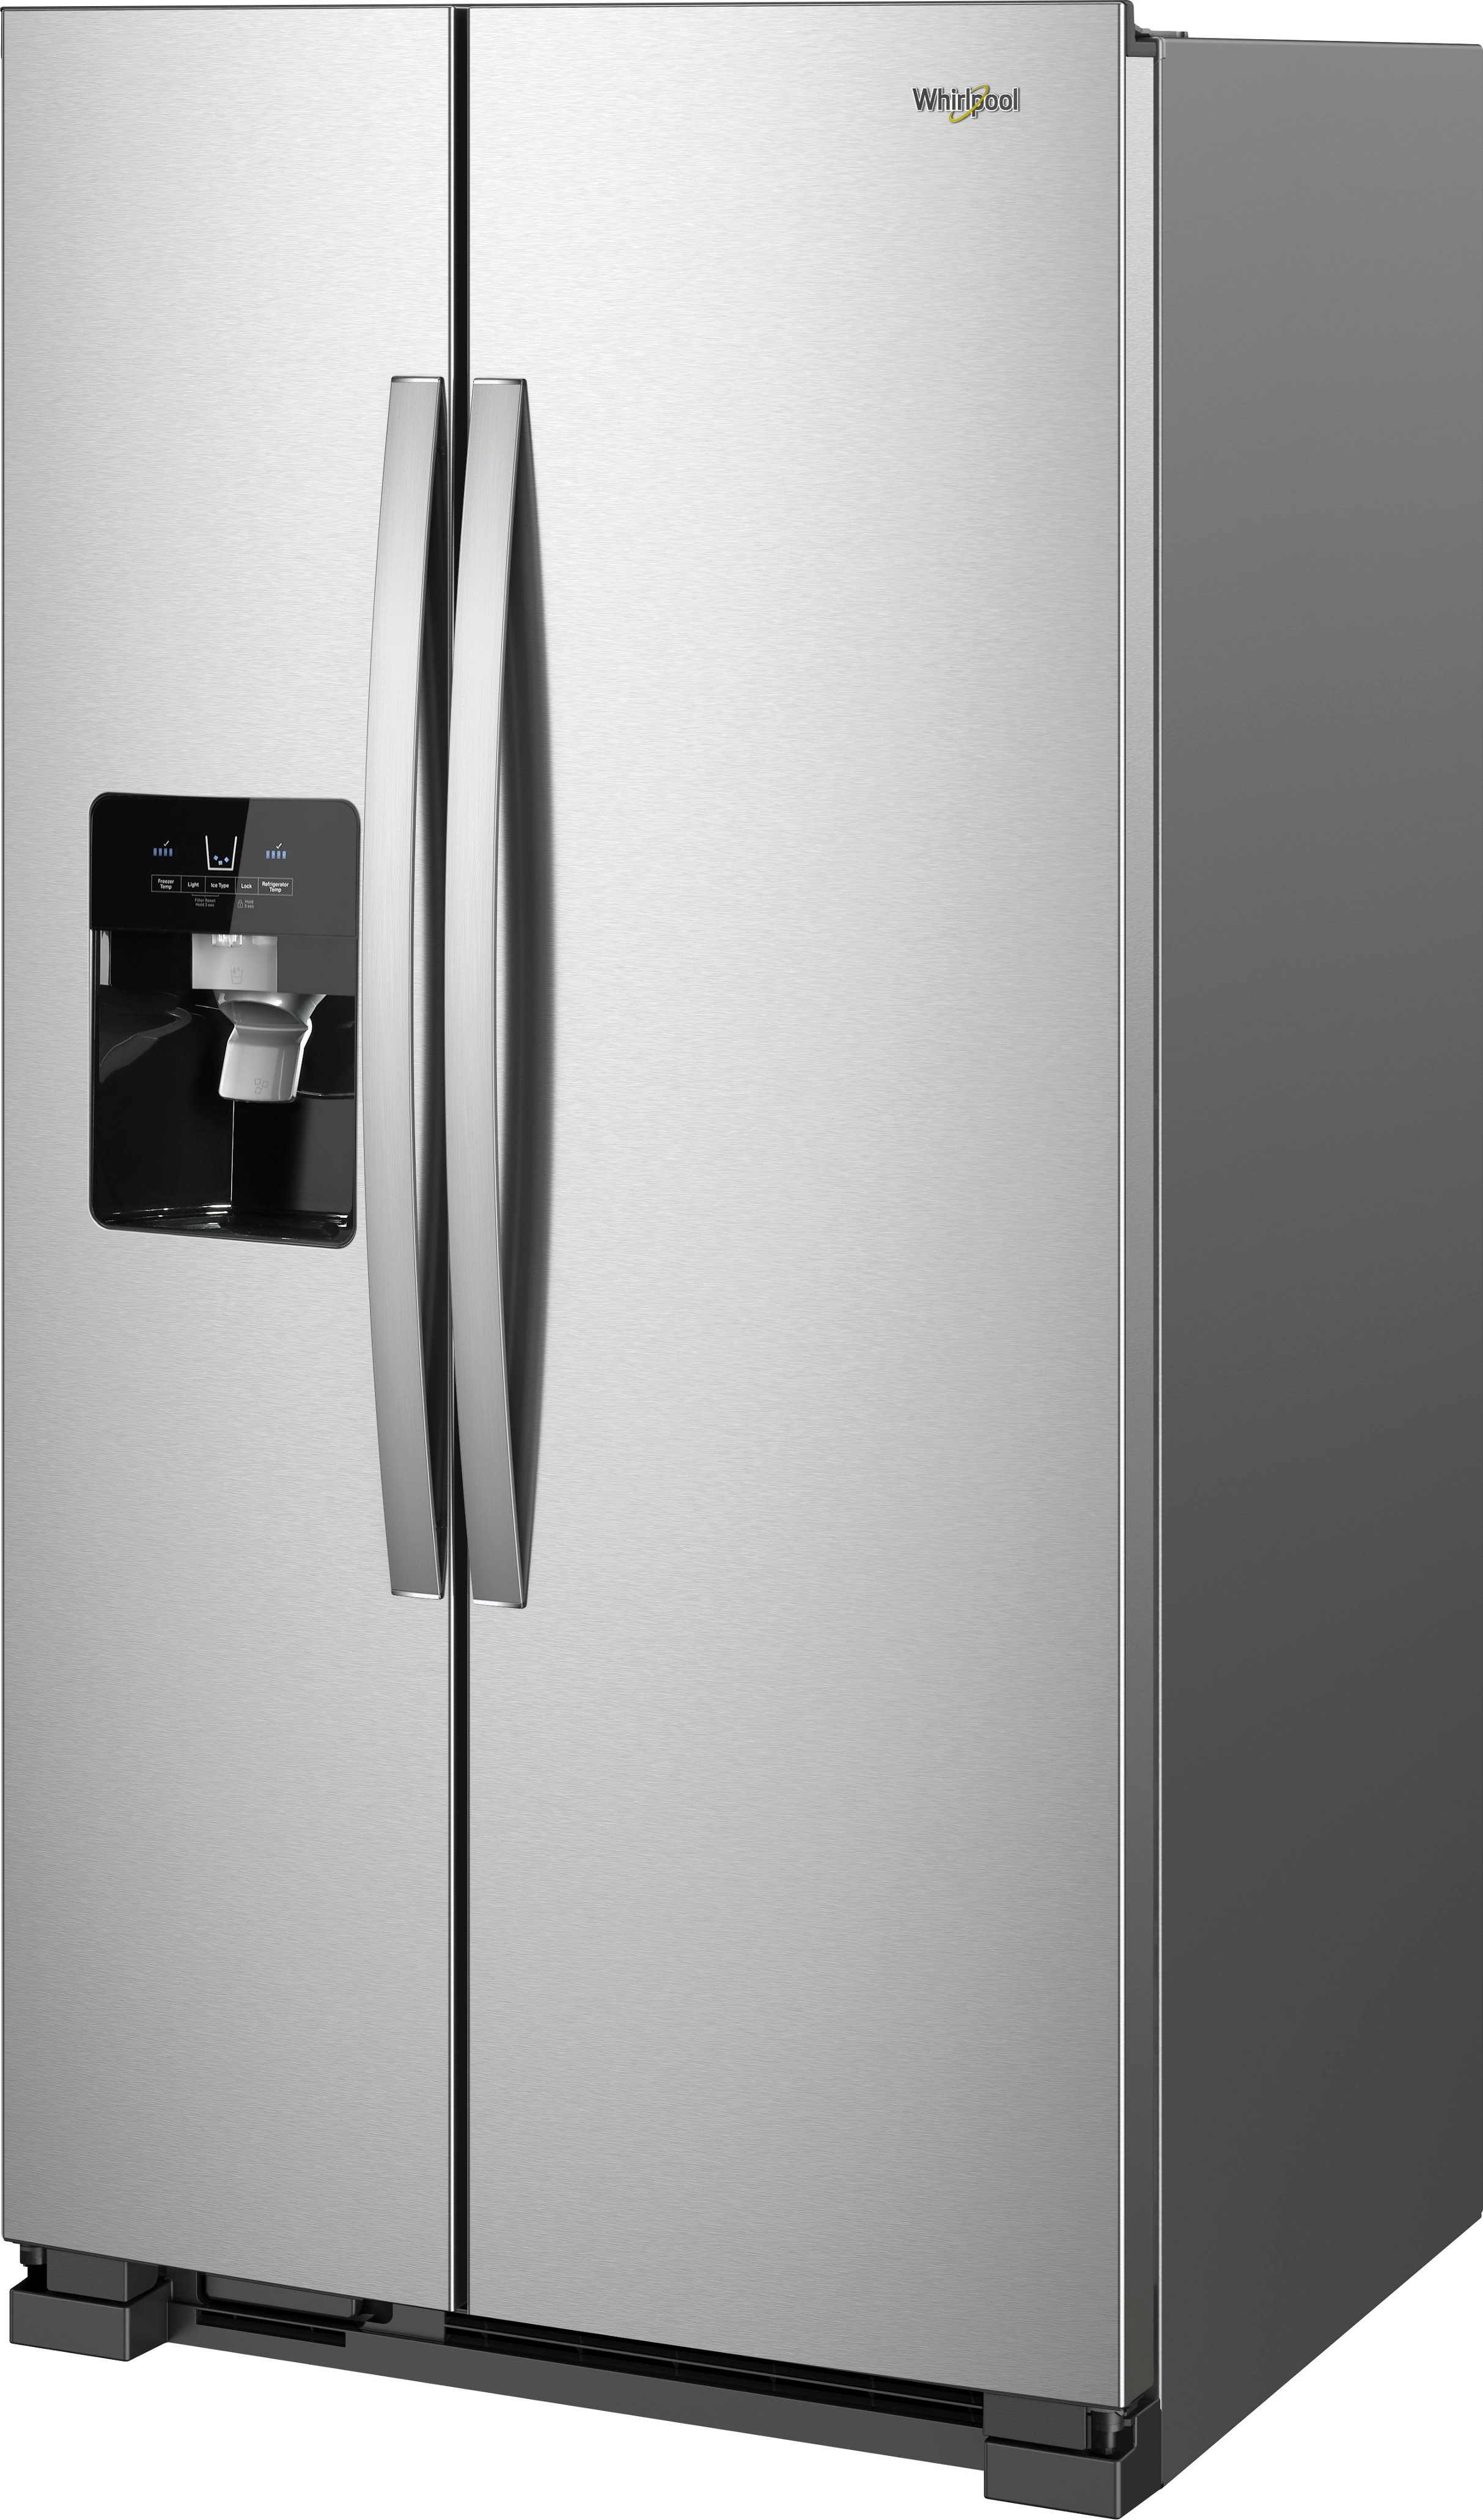 Left View: Whirlpool - 24.5 Cu. Ft. Side-by-Side Refrigerator - Stainless steel